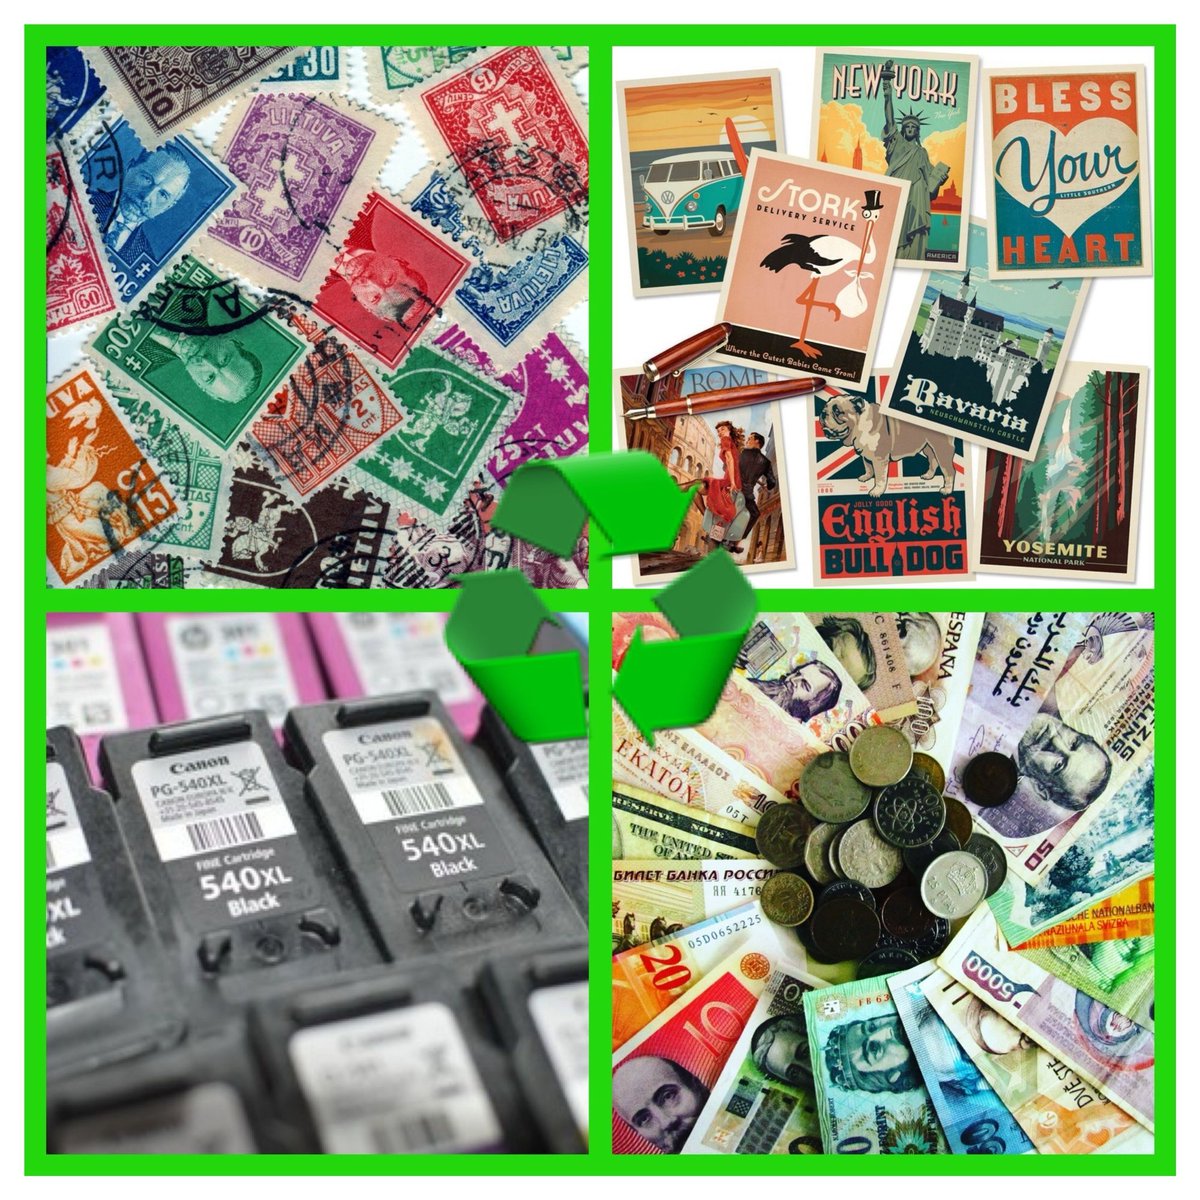 Phoenix Professional Development are collecting:

♻️ used stamps

♻️ postcards

♻️ foreign currency

to raise vital funds for @AmnestyUK.

For more info, please message @phoenixprodev.

#CharityHour